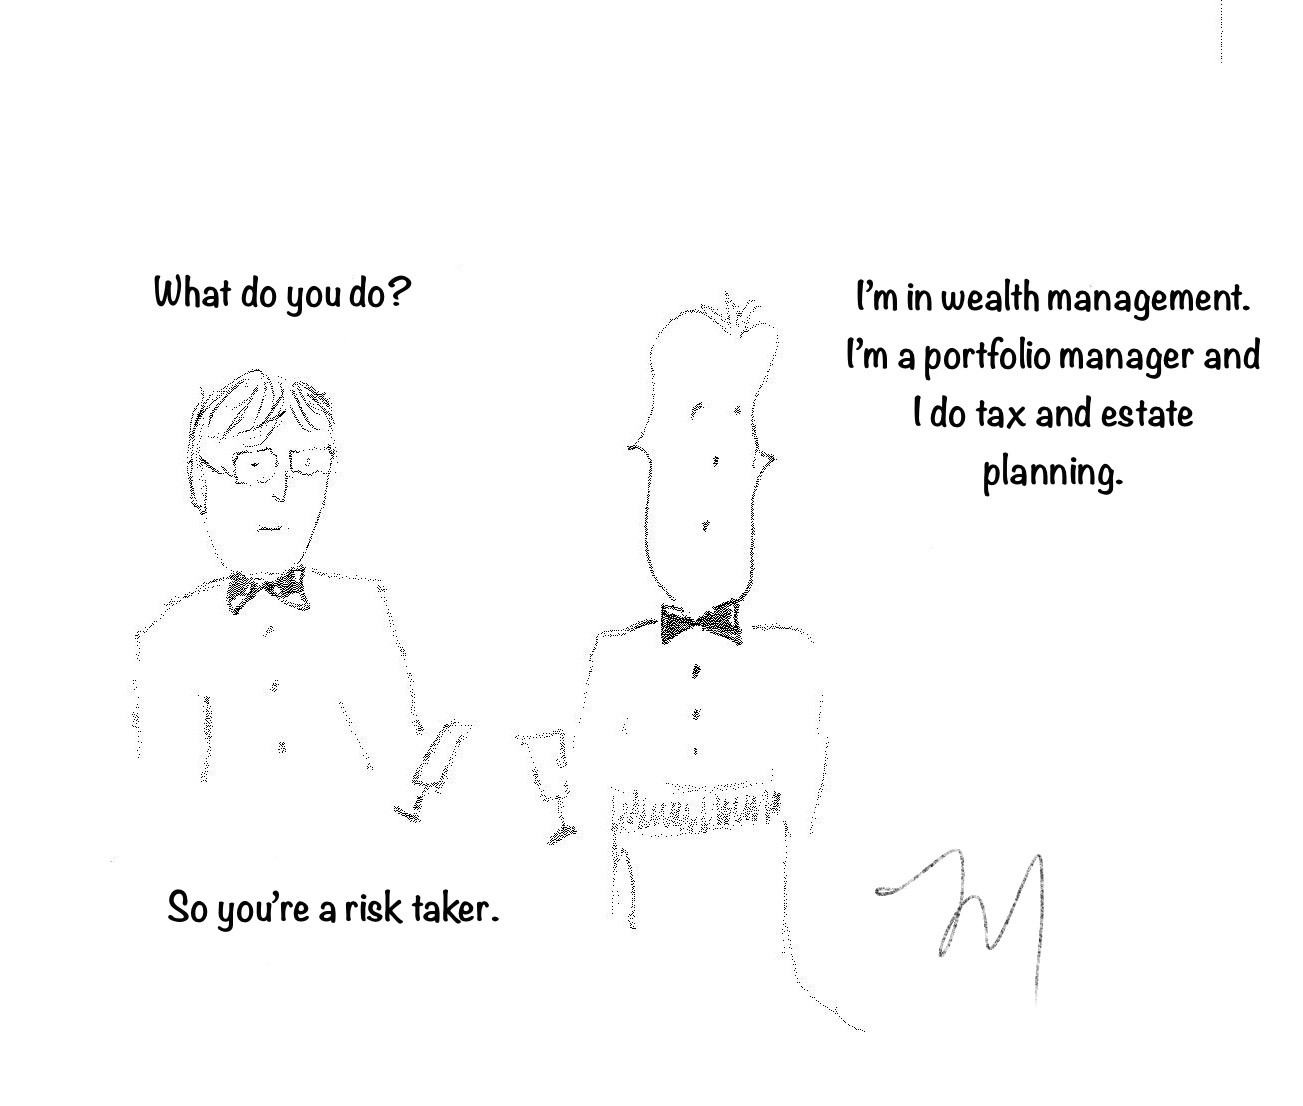 Cartoon of a man speaking to a financial advisor asking what he does